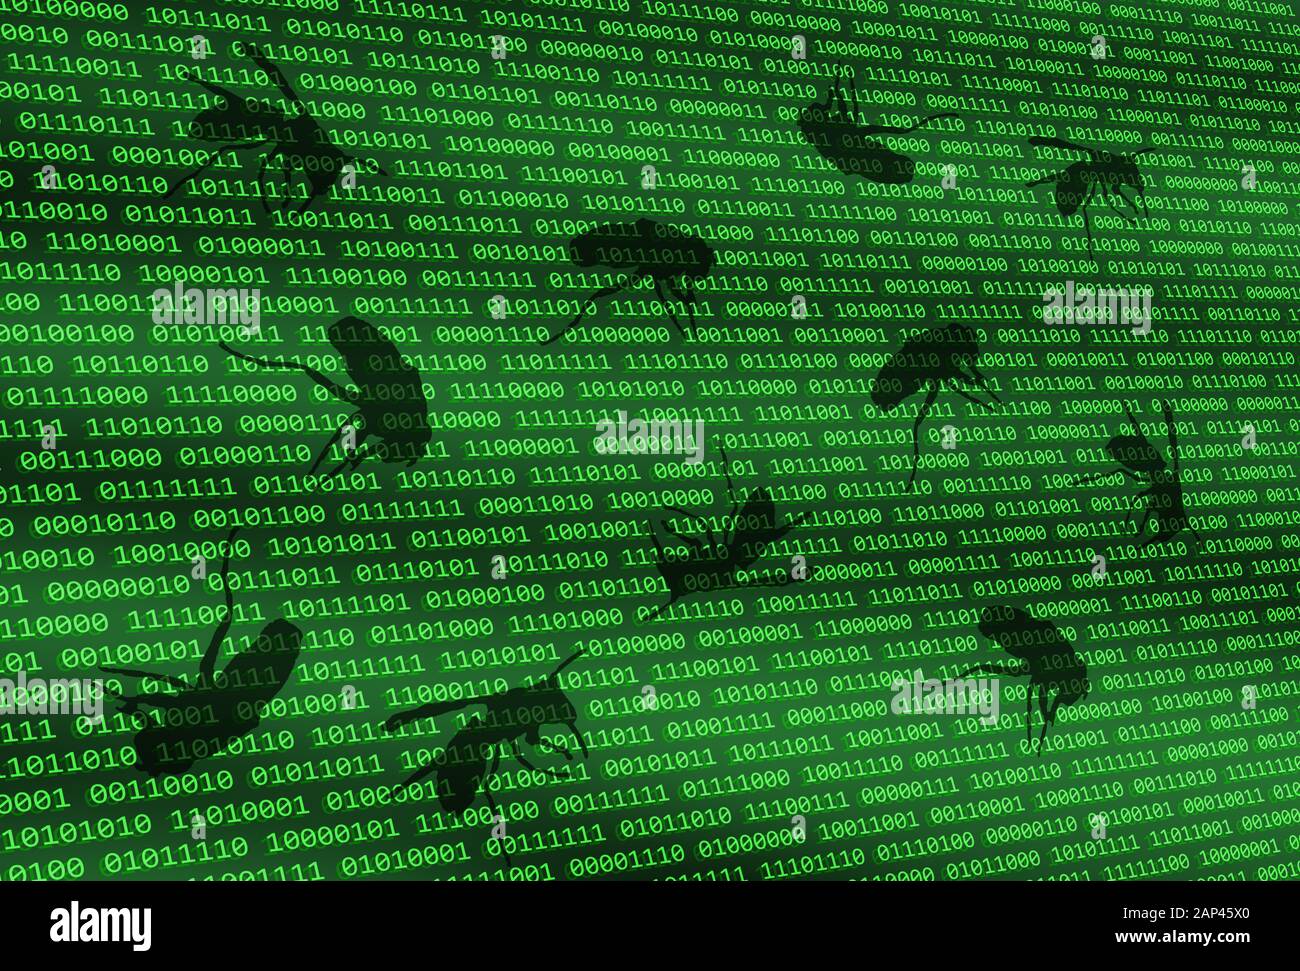 Illustration of bugs or insects crawling over binary computer data code to illustrate a computer software bug or computer virus. Stock Photo